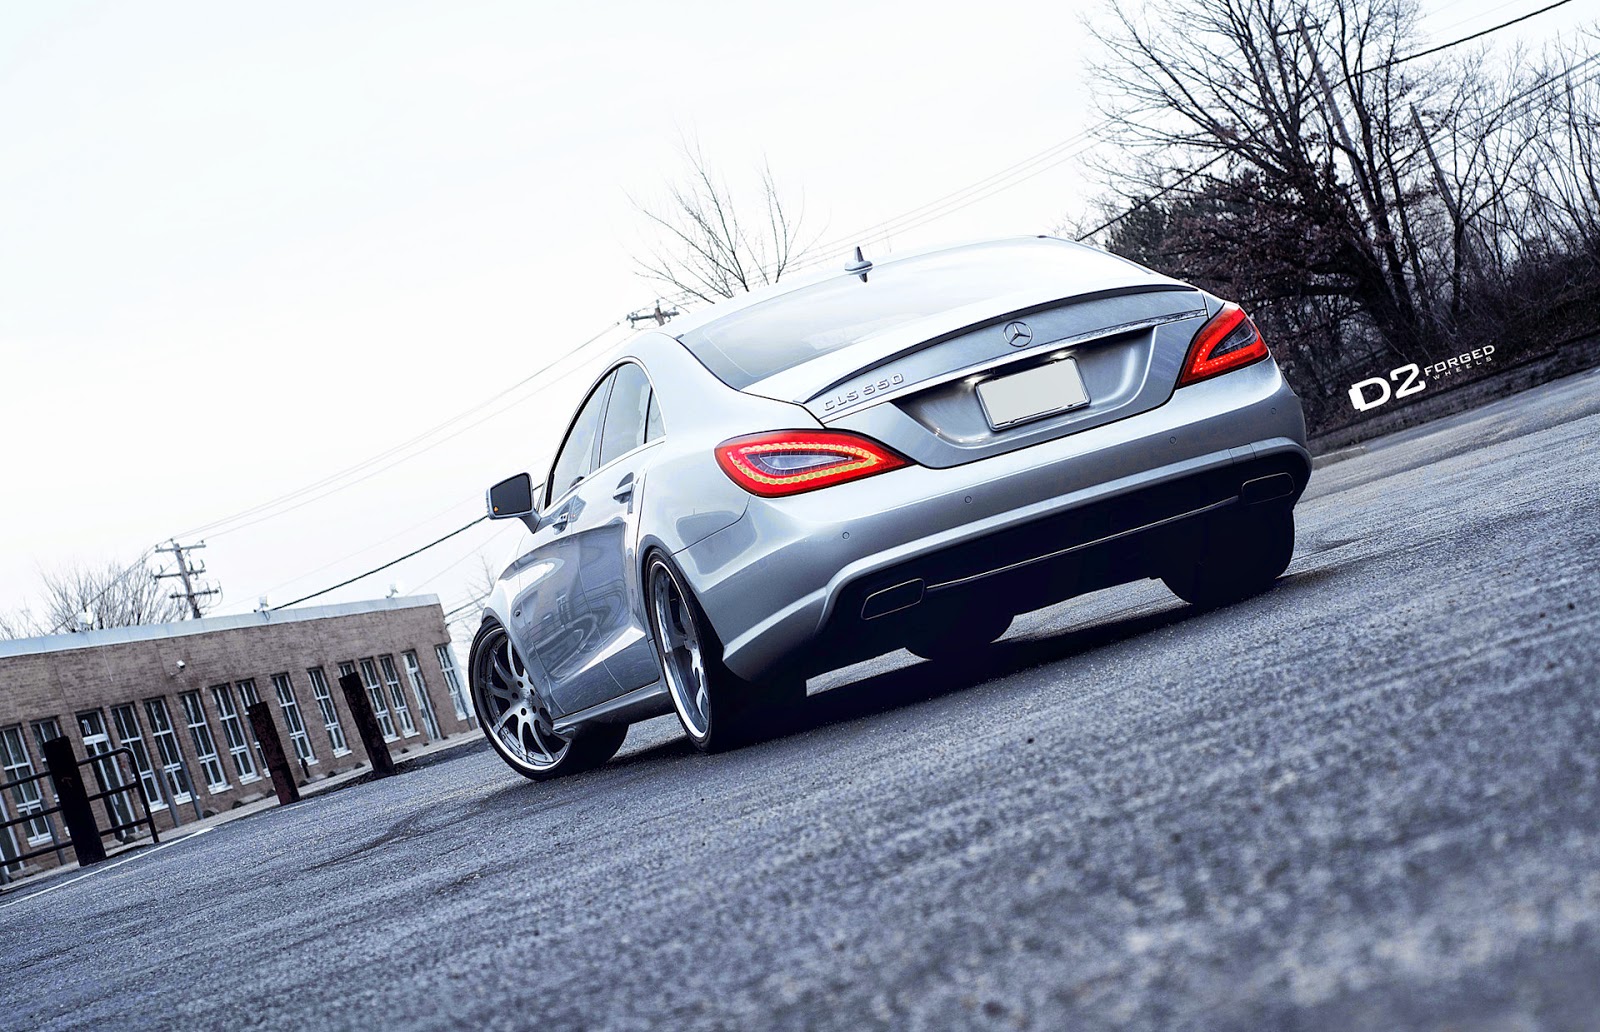 cls tuning